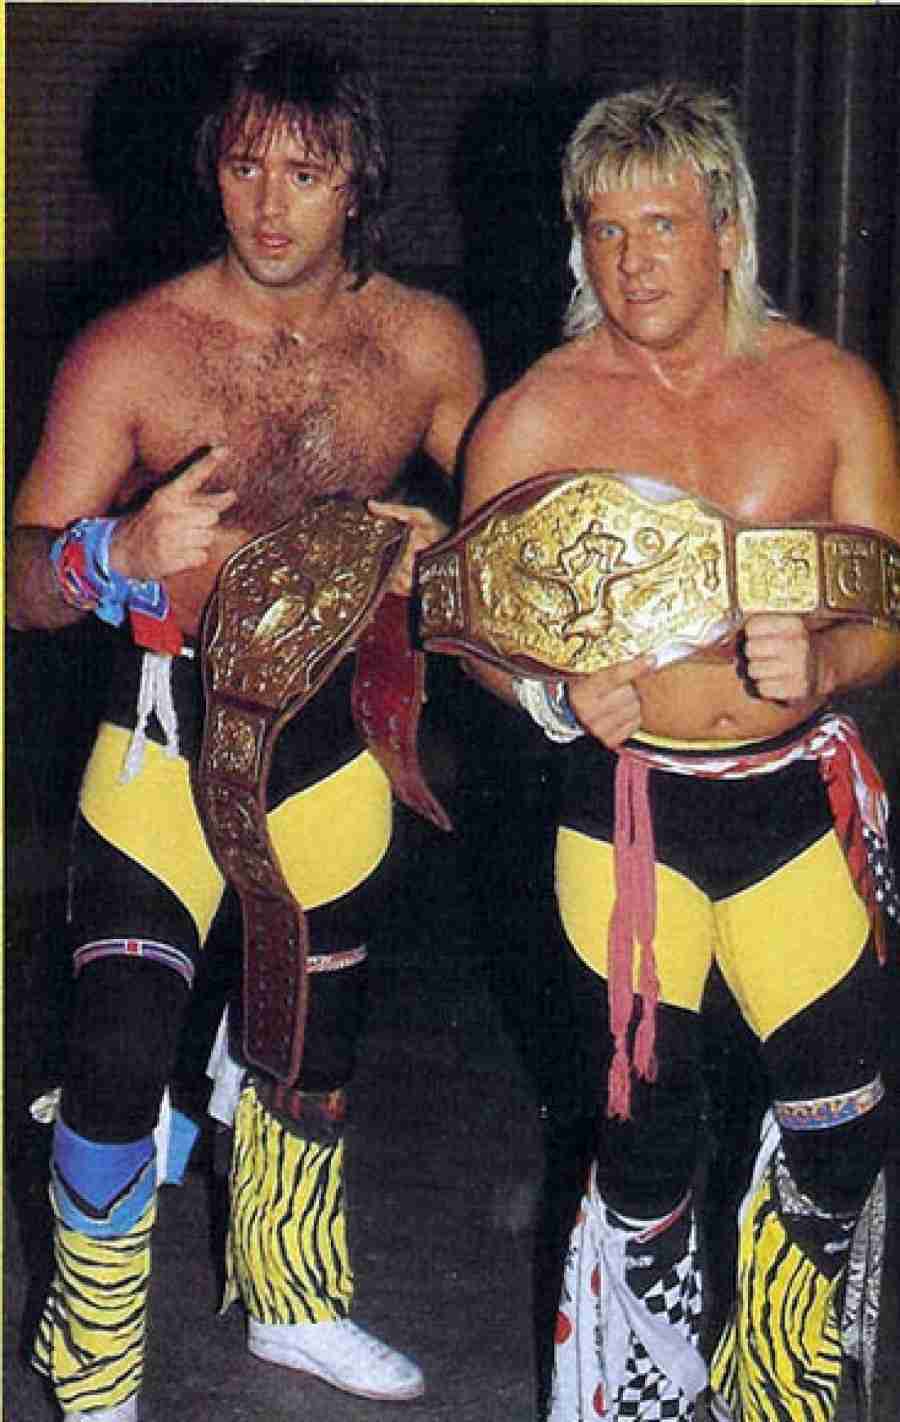 Not in Hall of Fame - The Rock and Roll Express (Ricky Morton & Robert  Gibson)